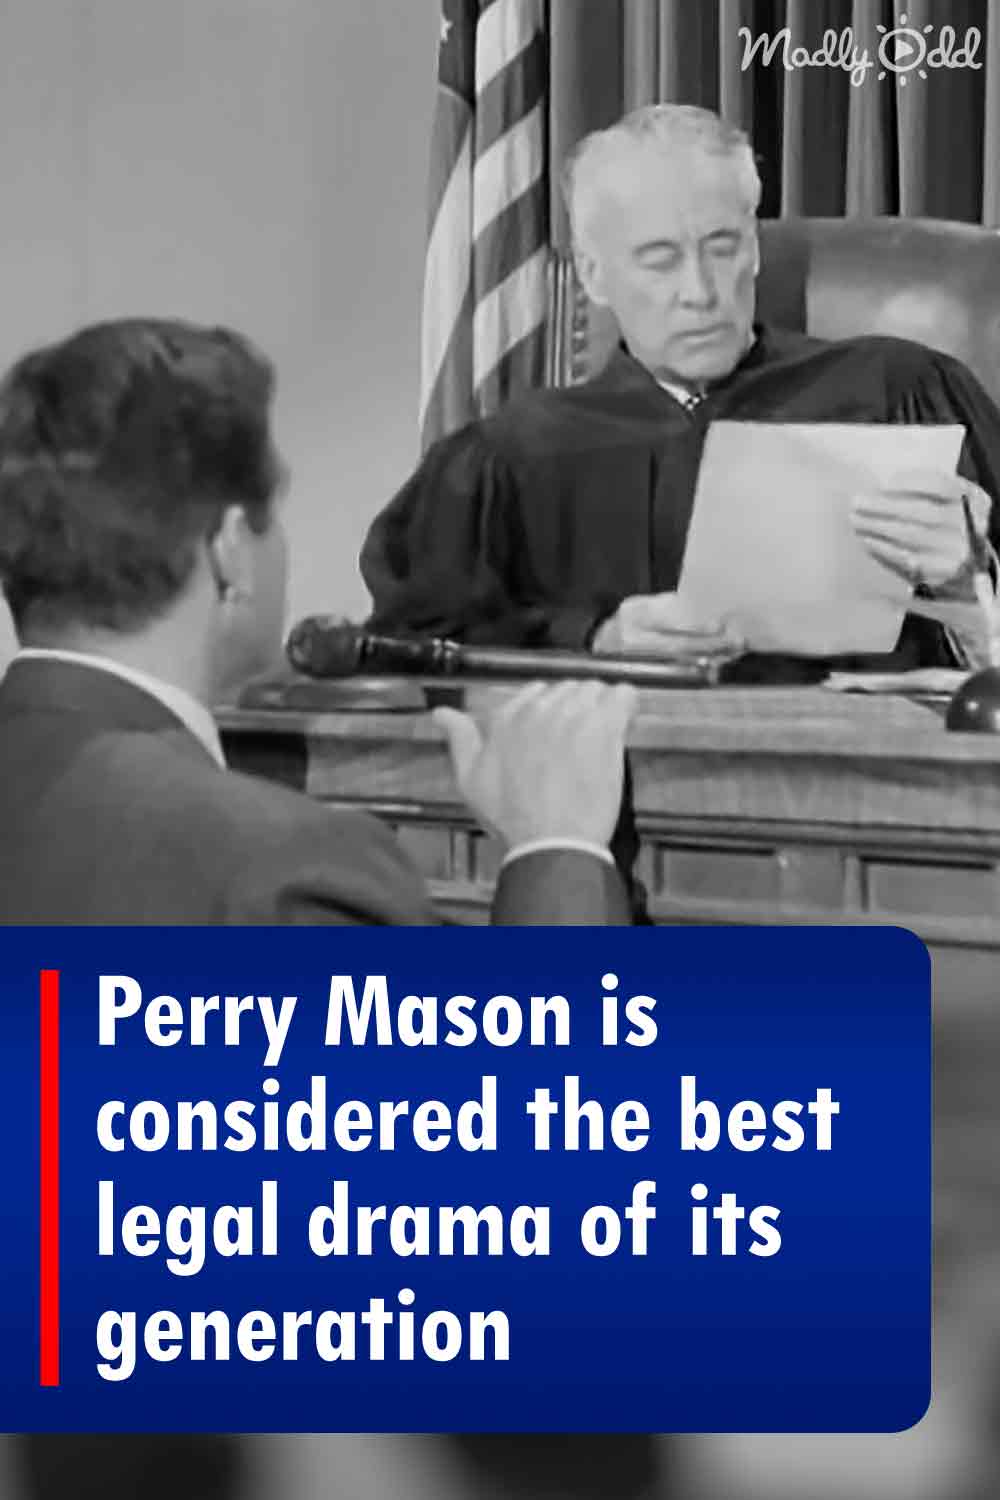 Perry Mason is considered the best legal drama of its generation